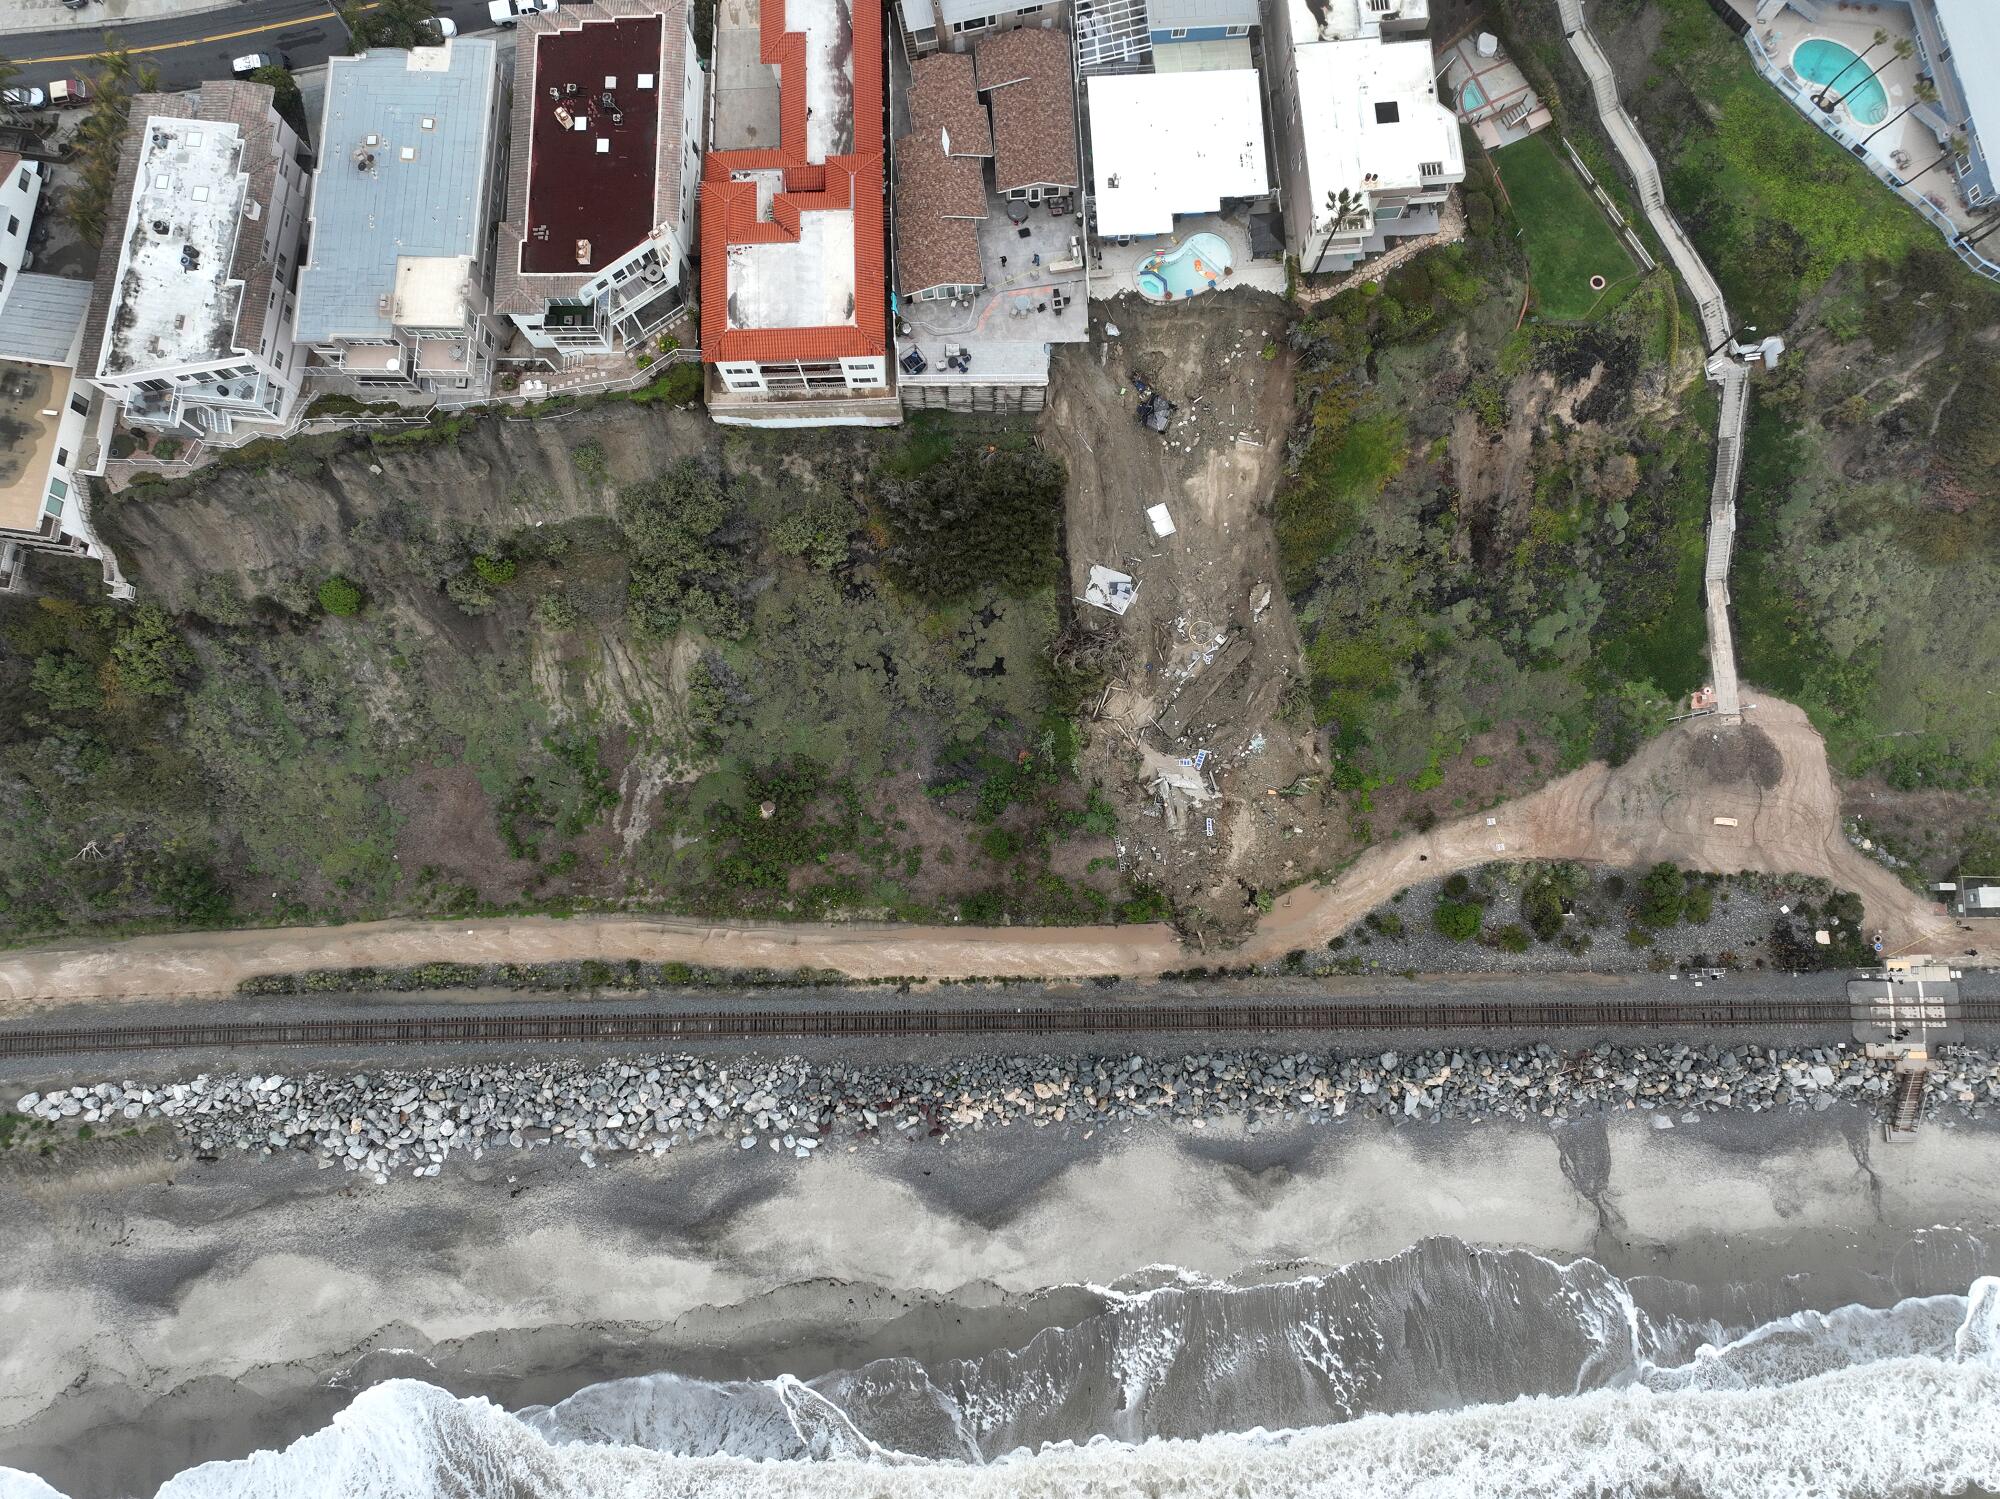 An overhead aerial view of homes on a cliff, a section where the land has given way,  and ocean.